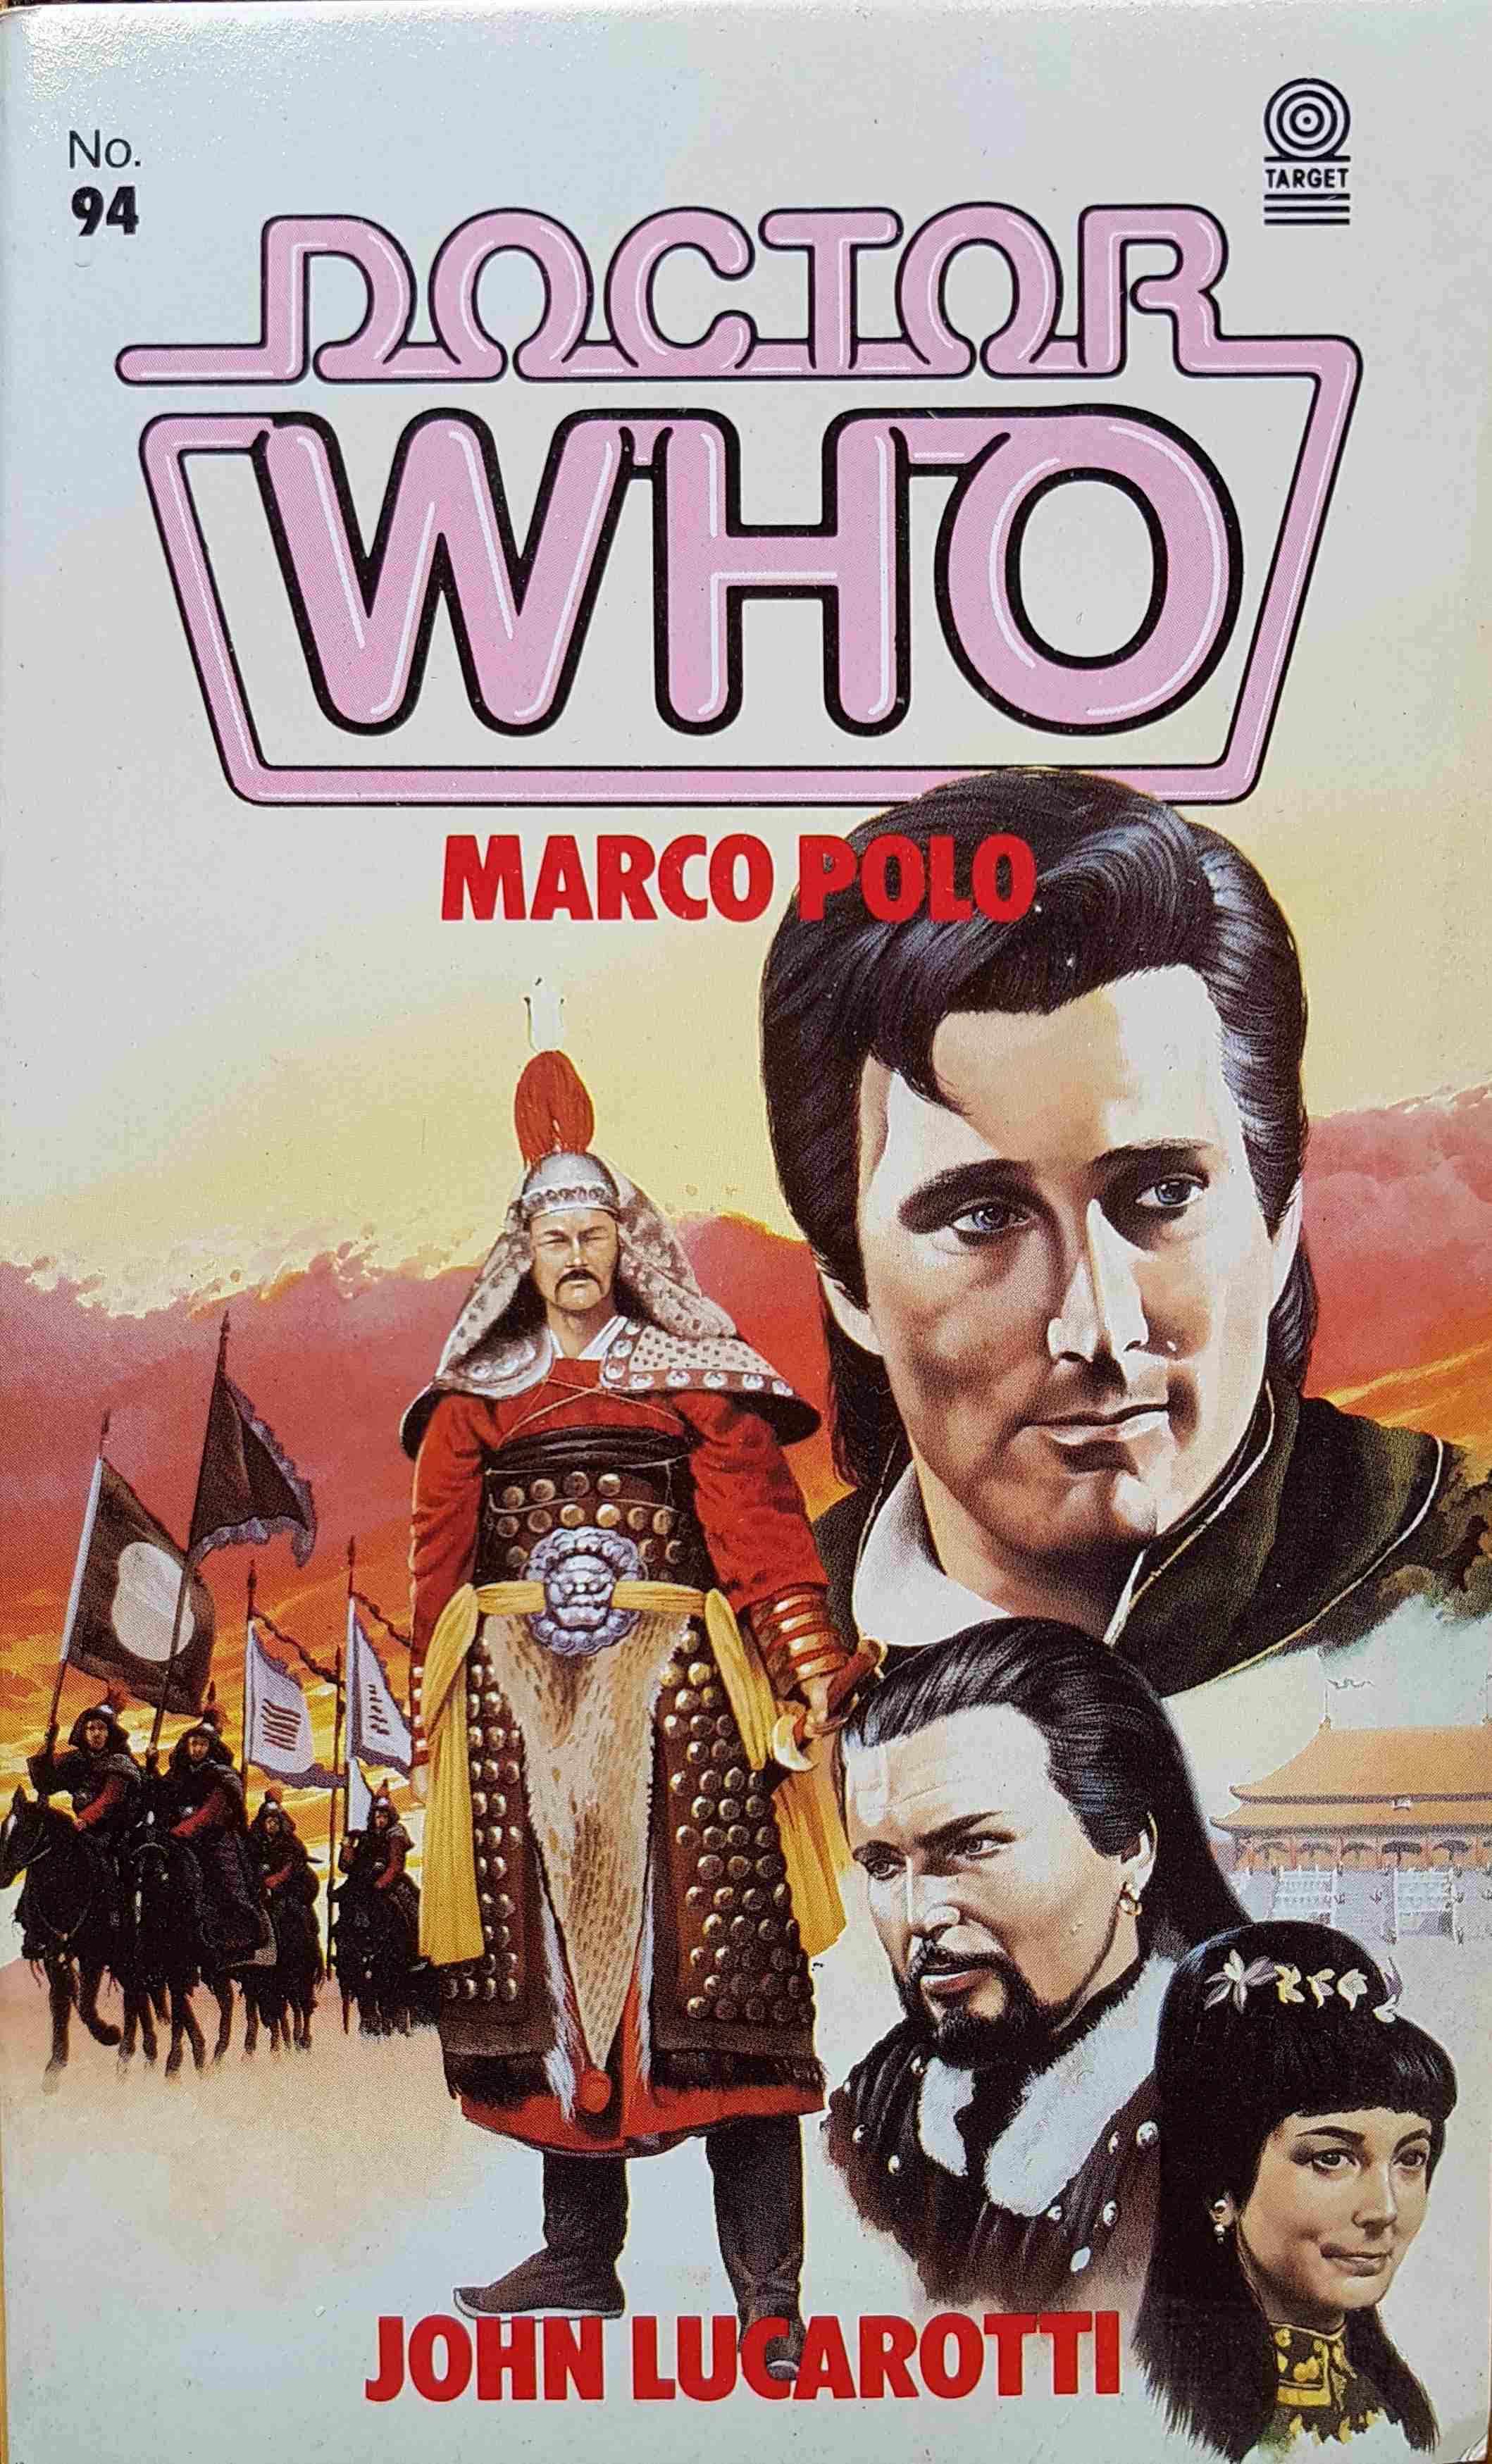 Picture of 0-426-19967-7 Doctor Who - Marco Polo by artist John Lucarotti from the BBC books - Records and Tapes library